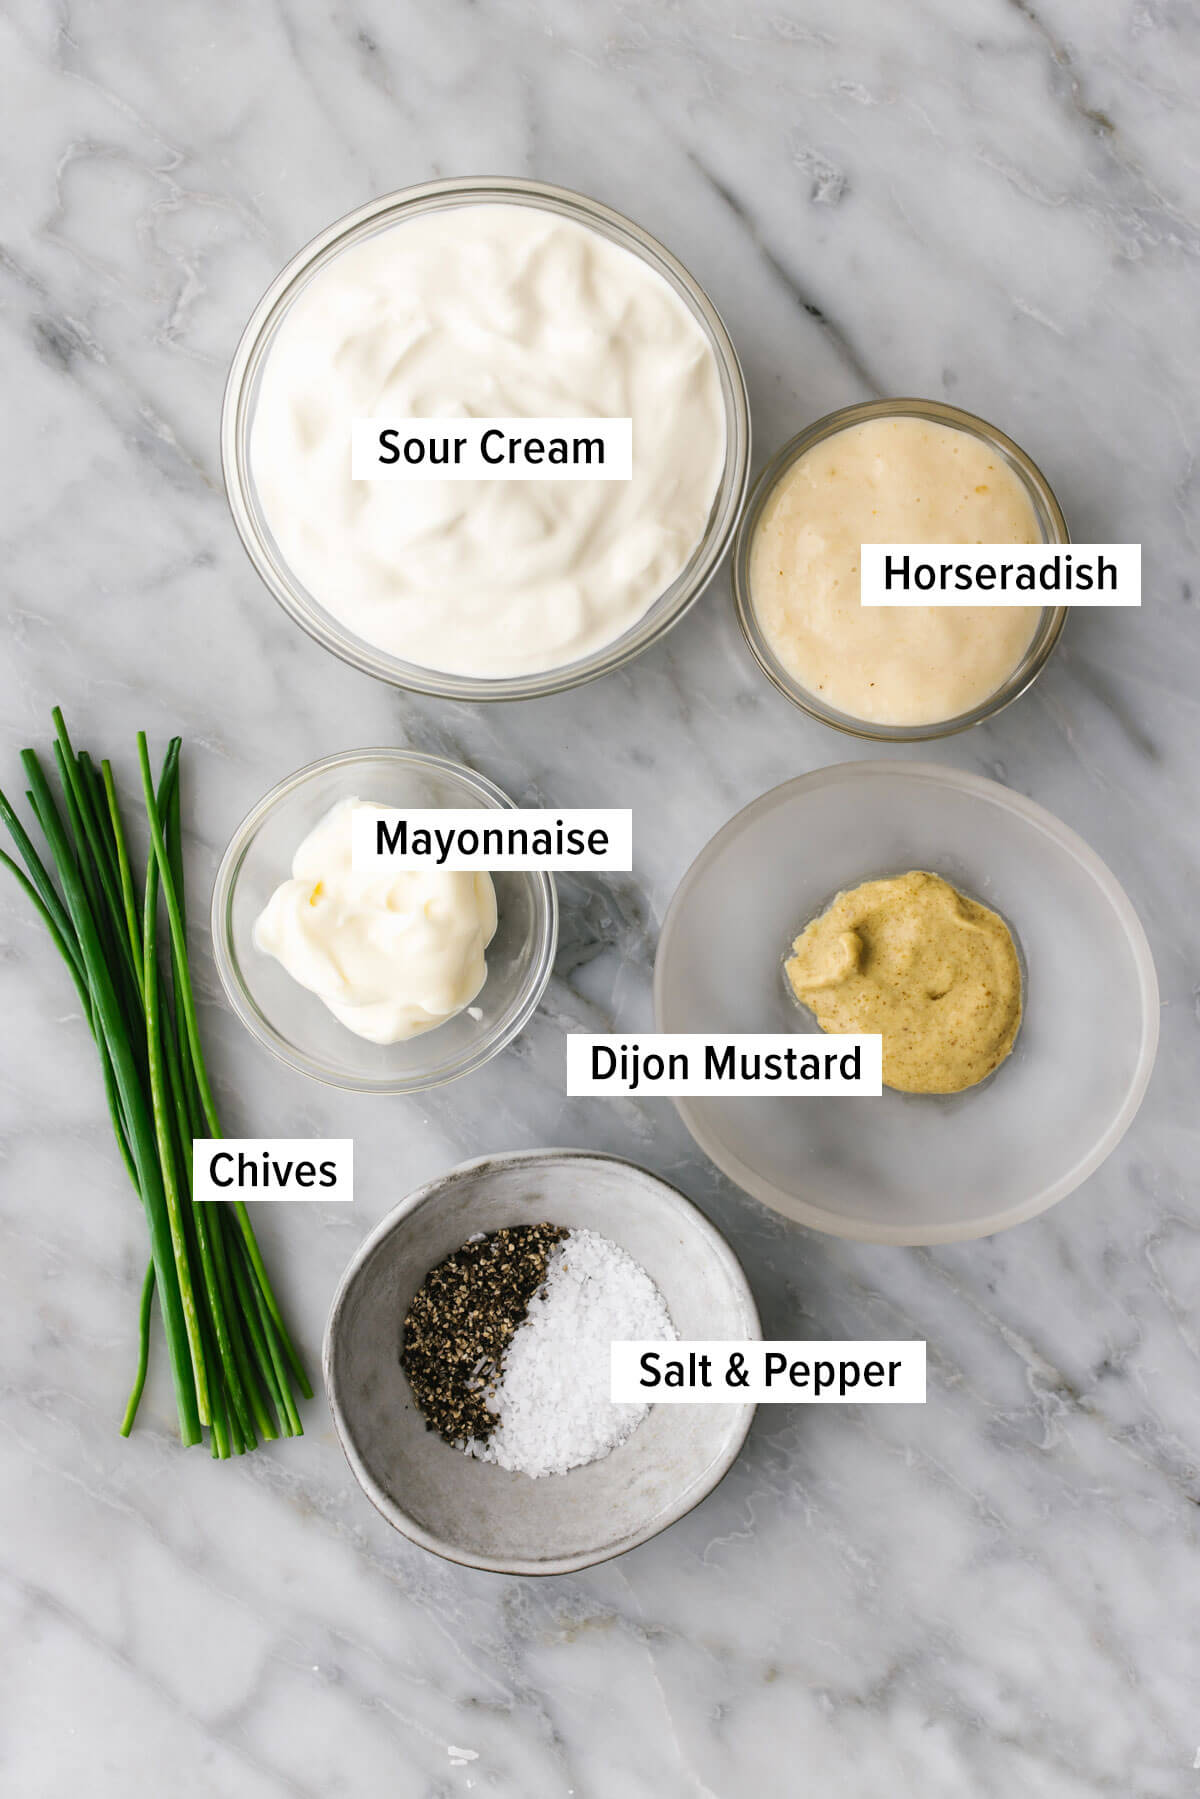 Ingredients for horseradish sauce on a table.